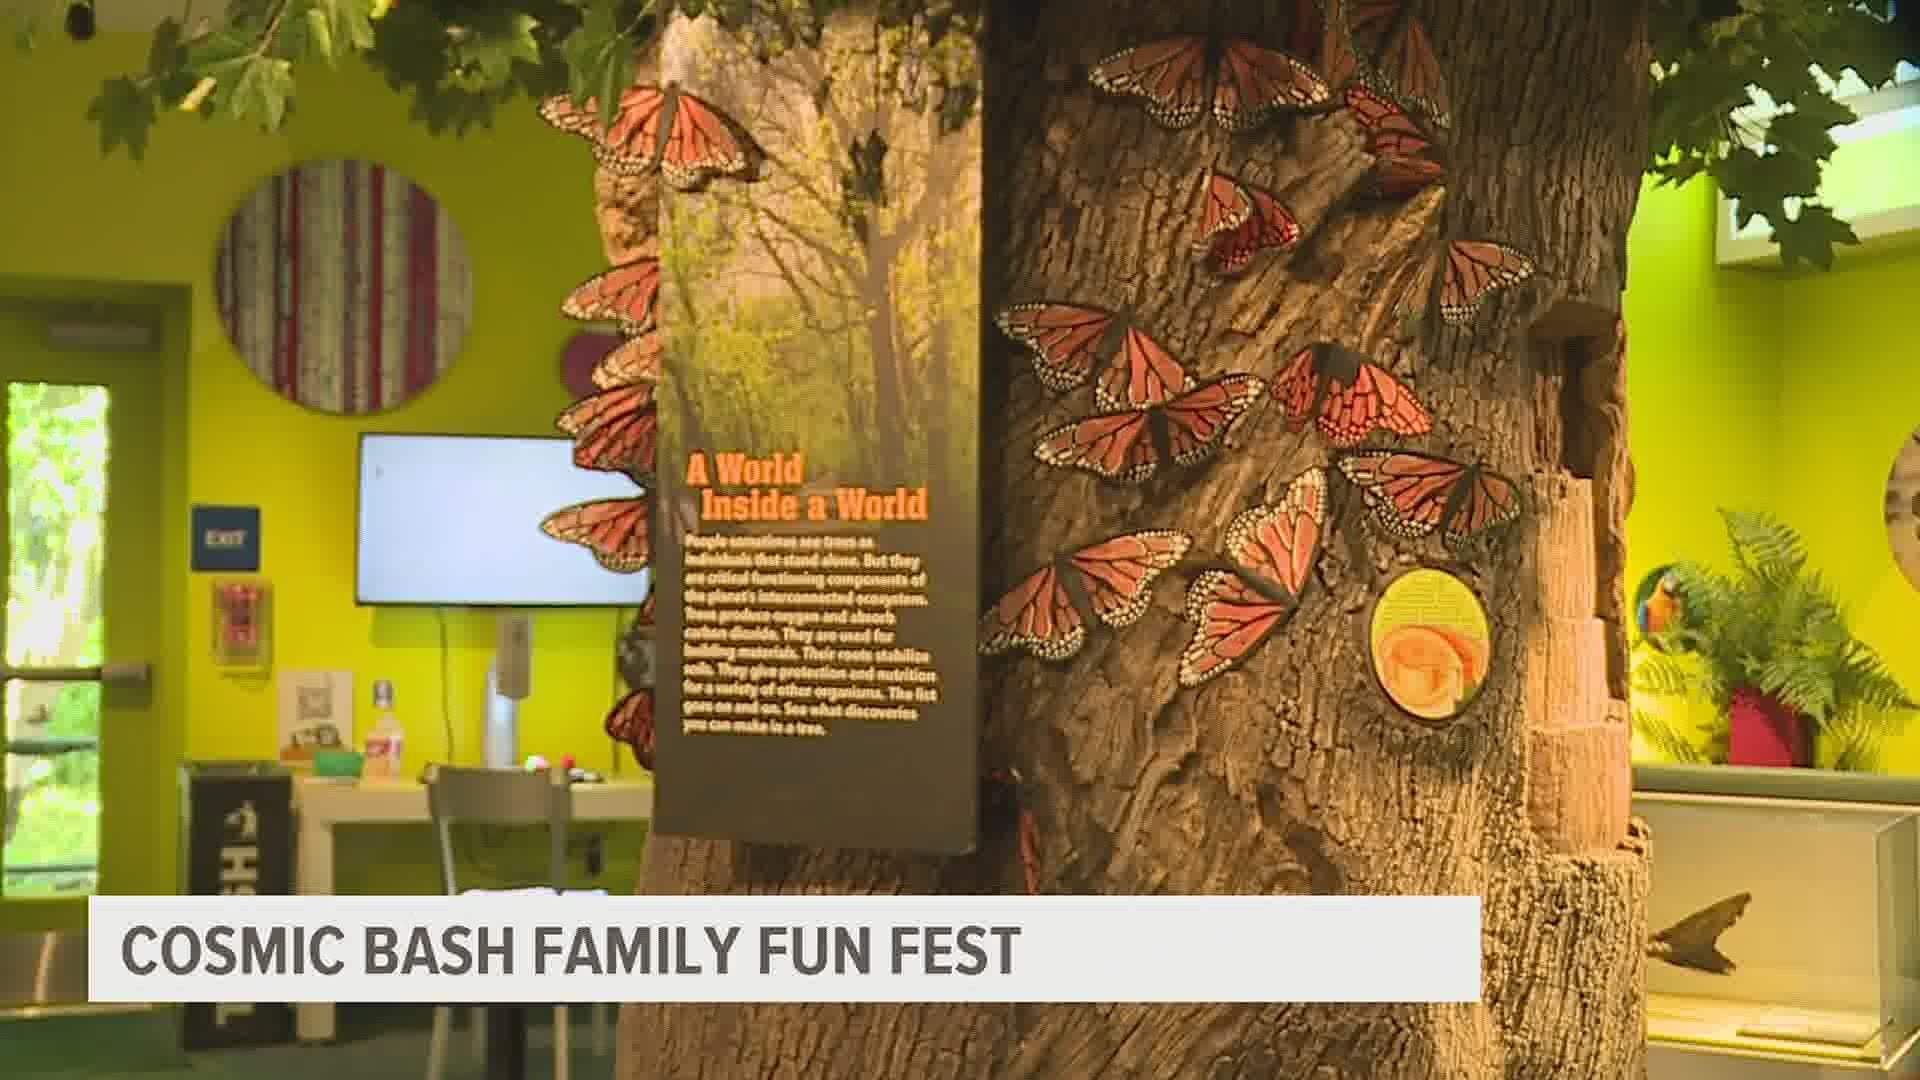 The North Museum of Nature and Science held the Cosmic Bash Family Fun Fest in Lancaster today to promote learning about the natural world around us.